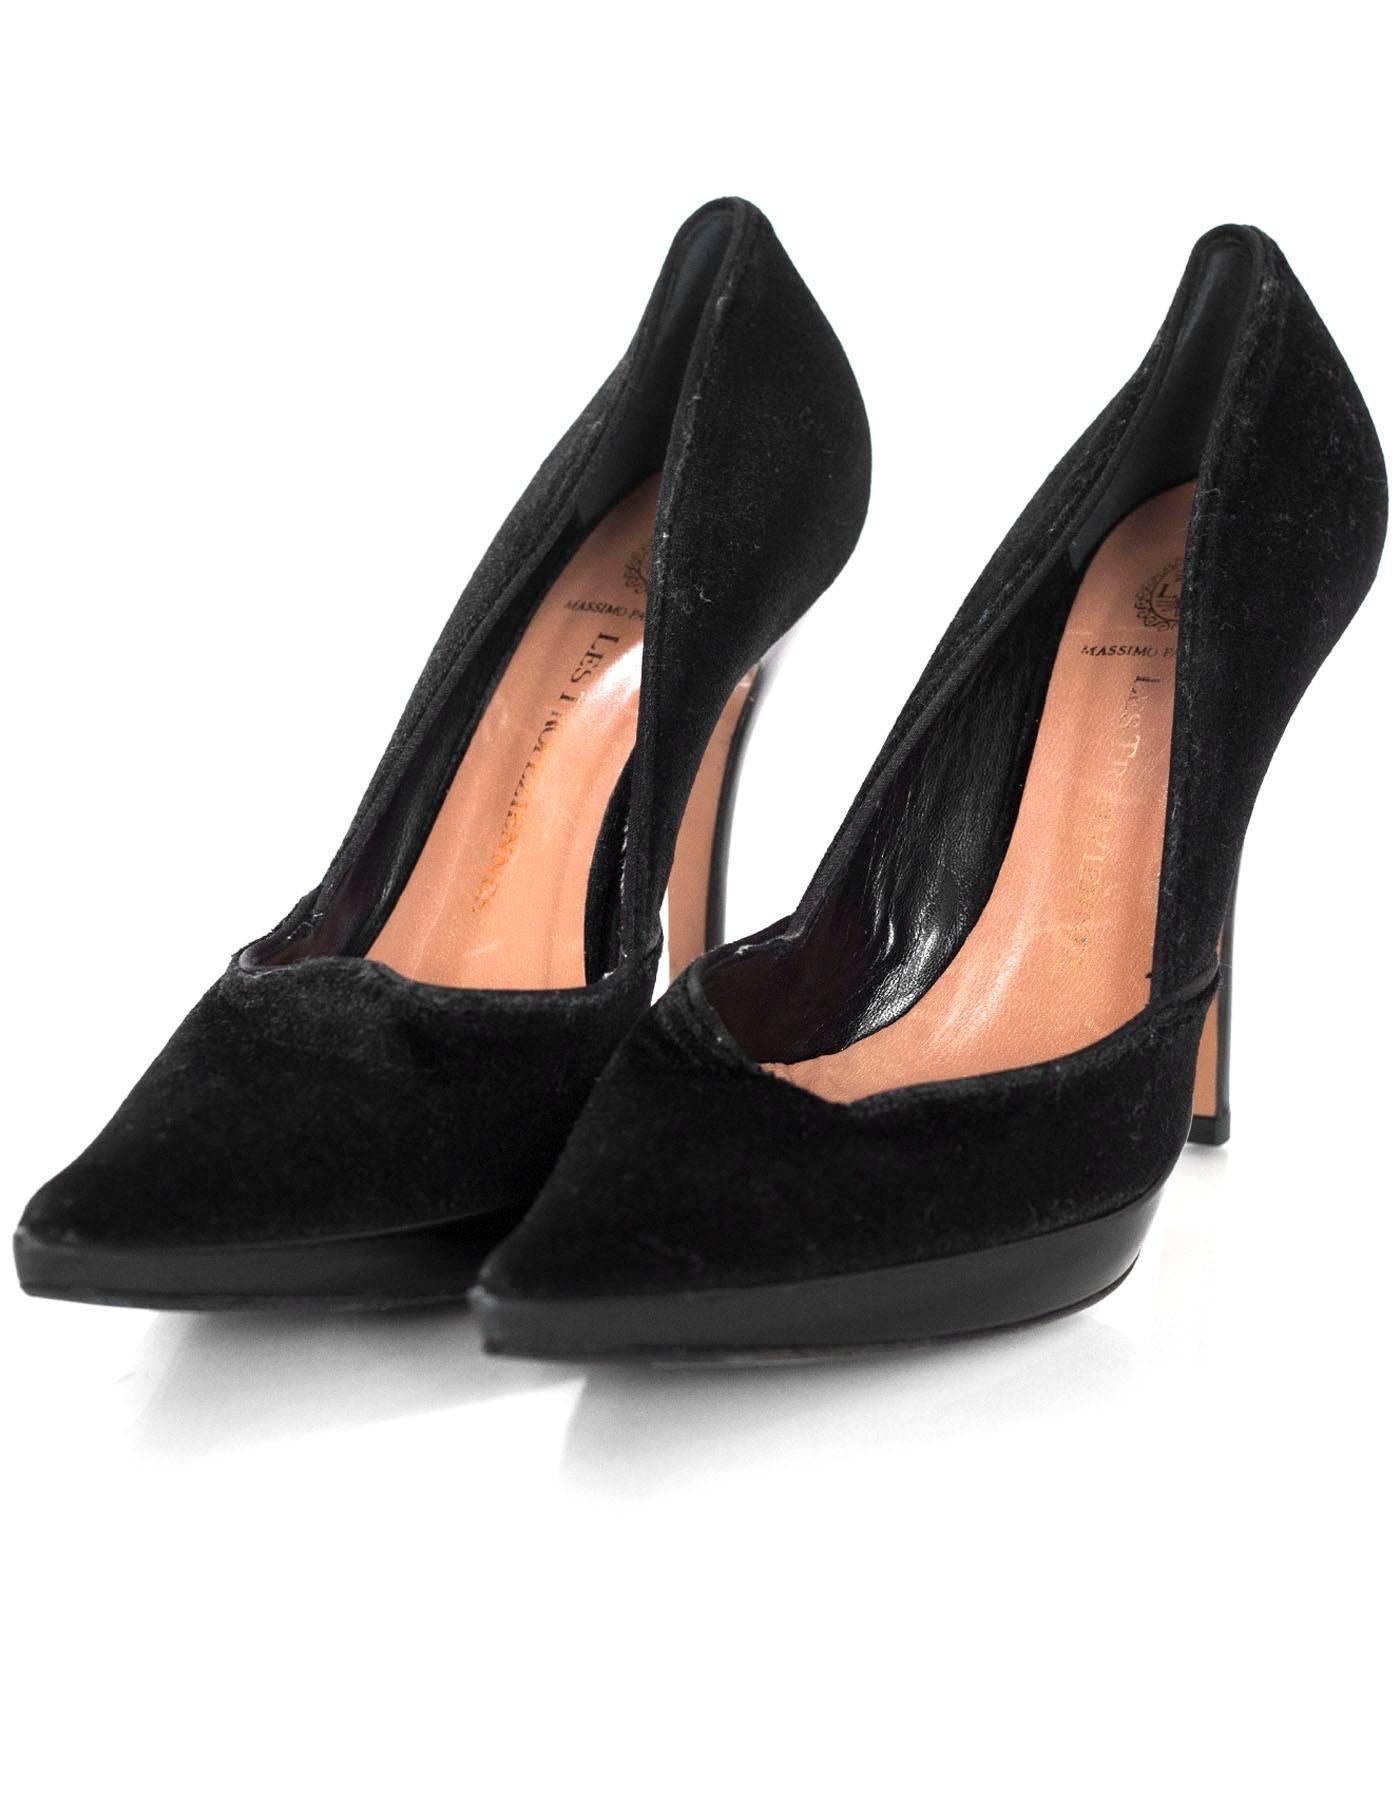 Les Tropeziennes Black Velvet Pumps Sz 38.5

Made In: Italy
Color: Black
Closure/Opening: Slide on
Sole Stamp: Made in Italy vero cuoio Les Tropeziennes 38.5
Overall Condition: Excellent pre-owned condition, no signs of wear with the exception of